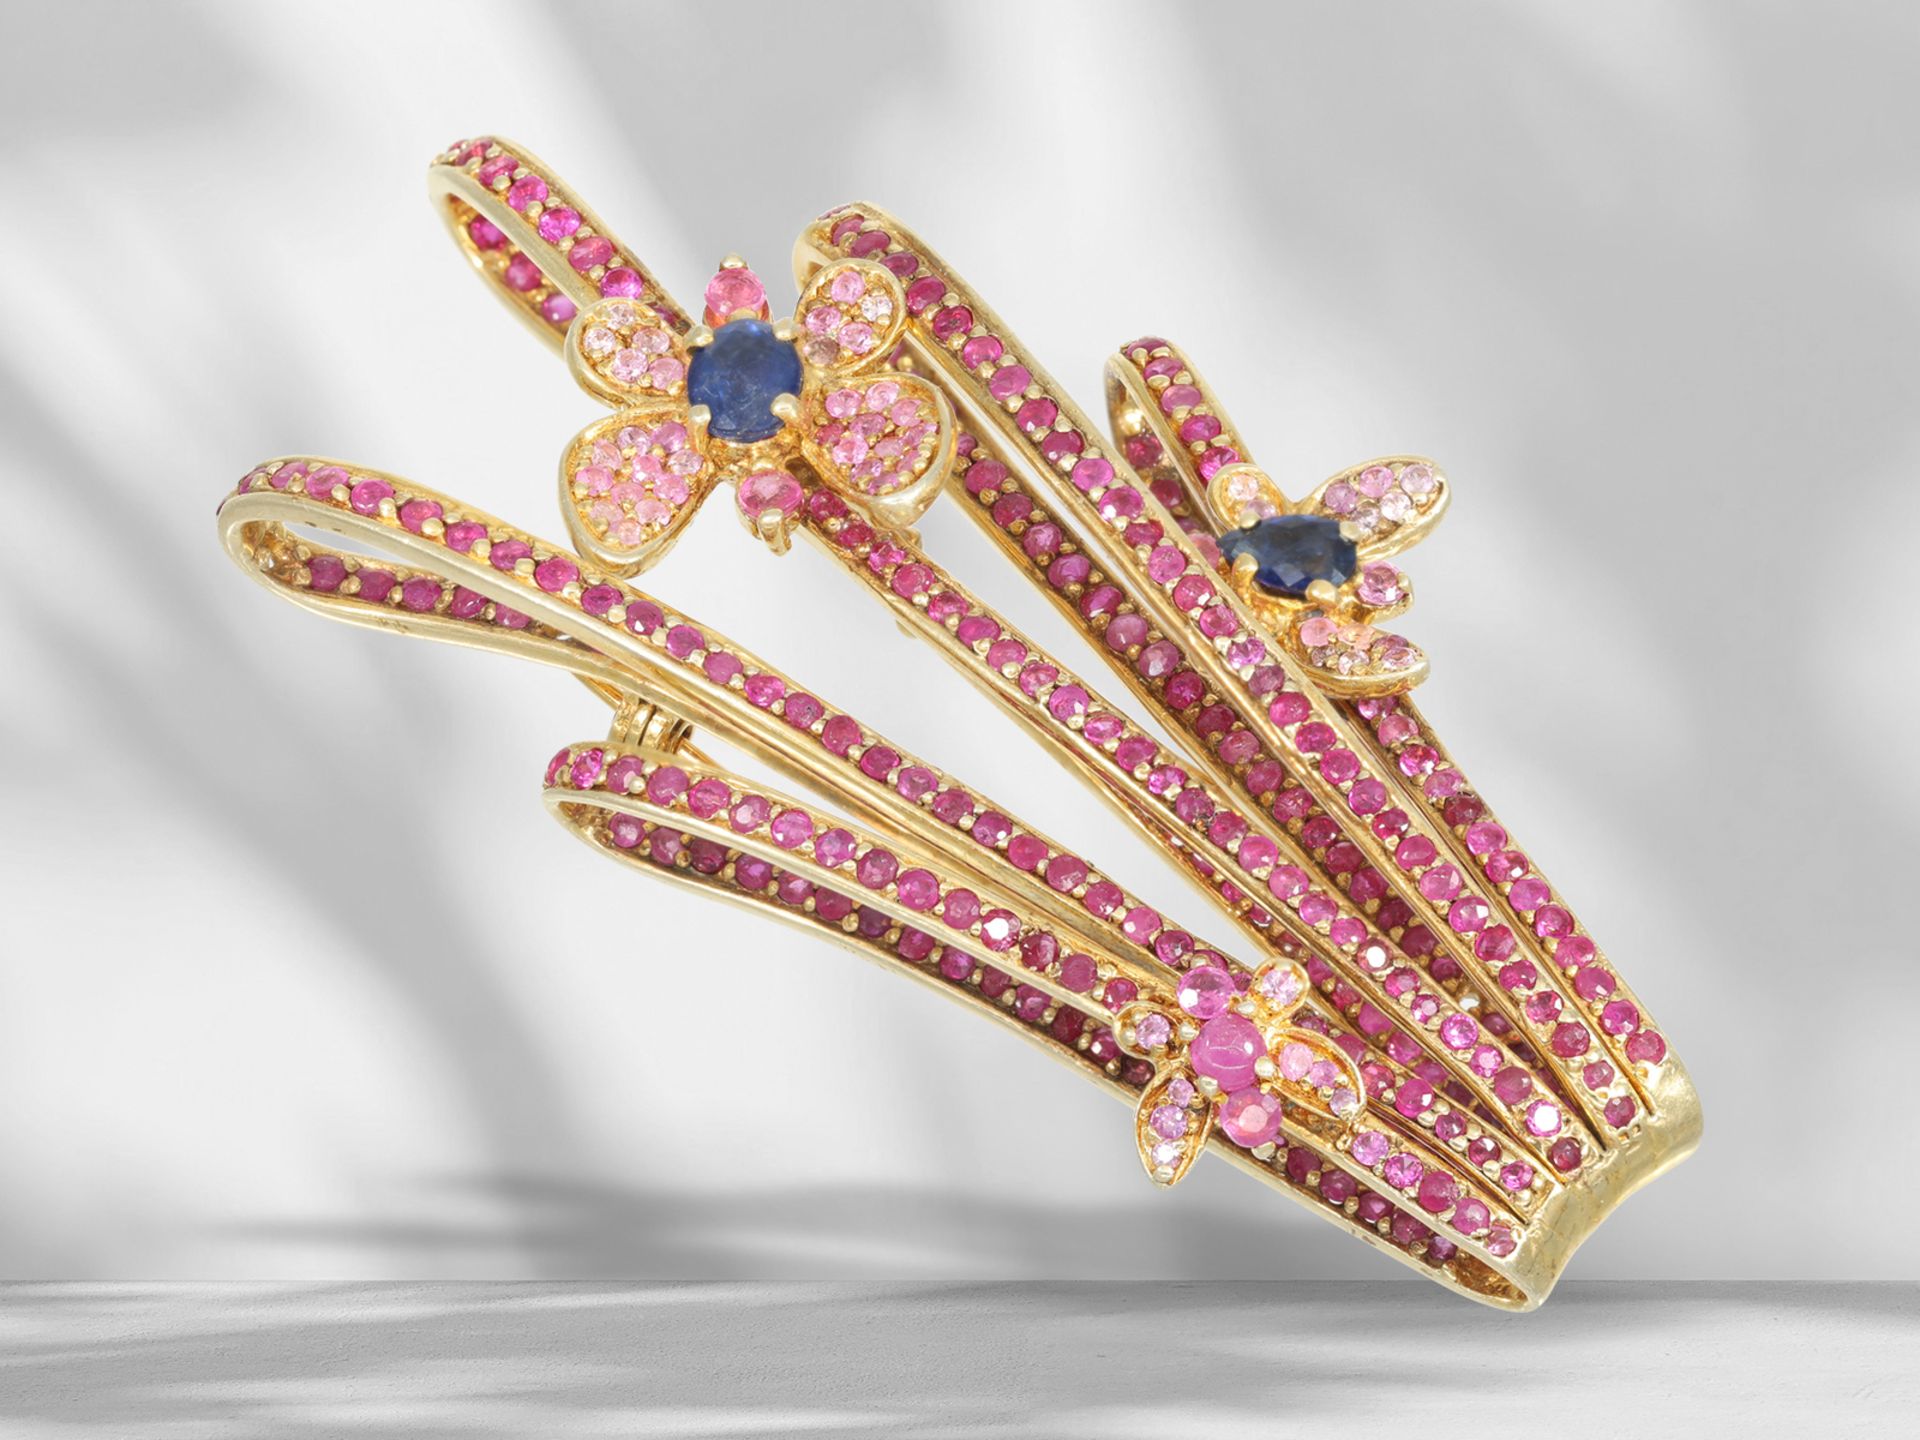 Extremely decorative designer brooch with sapphires and rubies, handmade from 925 silver gilt